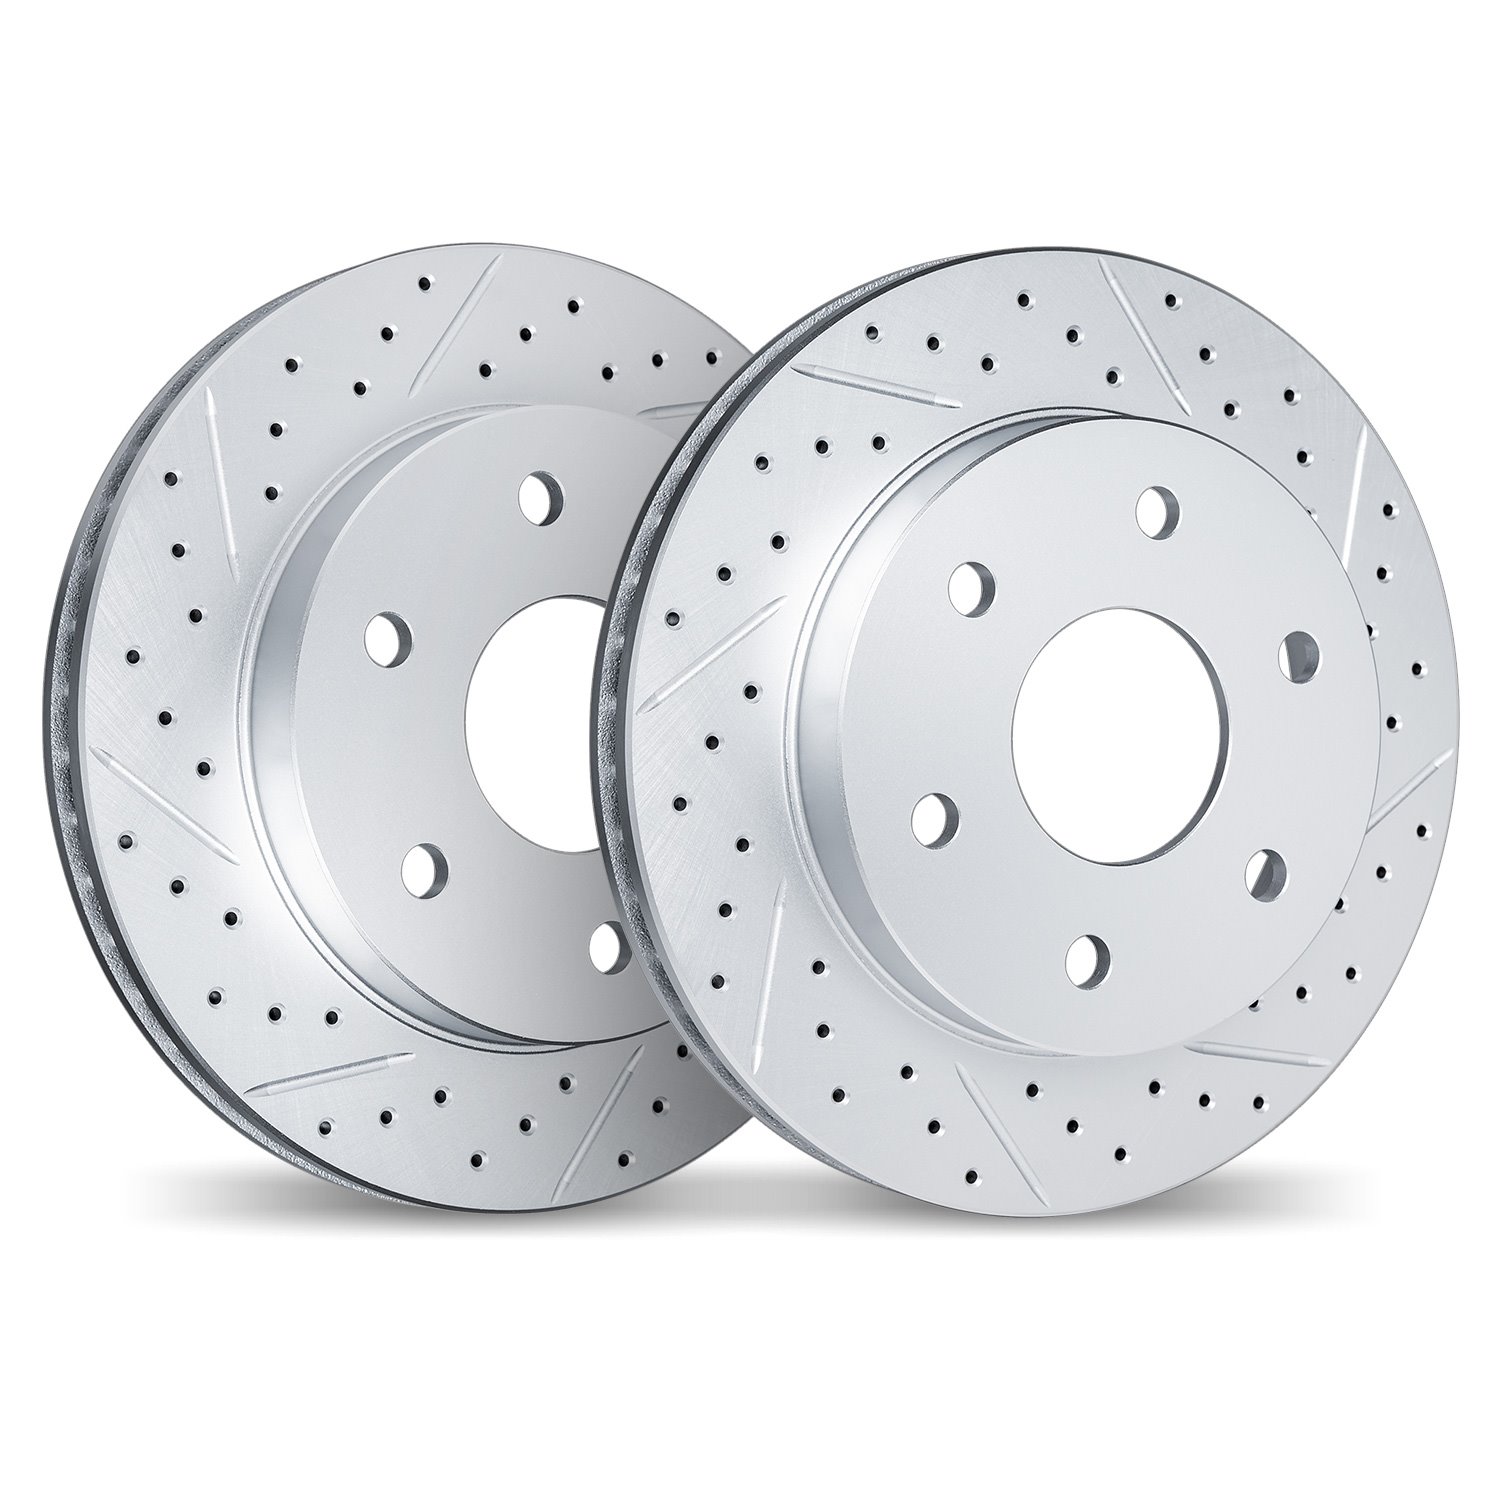 2002-46032 Geoperformance Drilled/Slotted Brake Rotors, 2004-2009 GM, Position: Rear